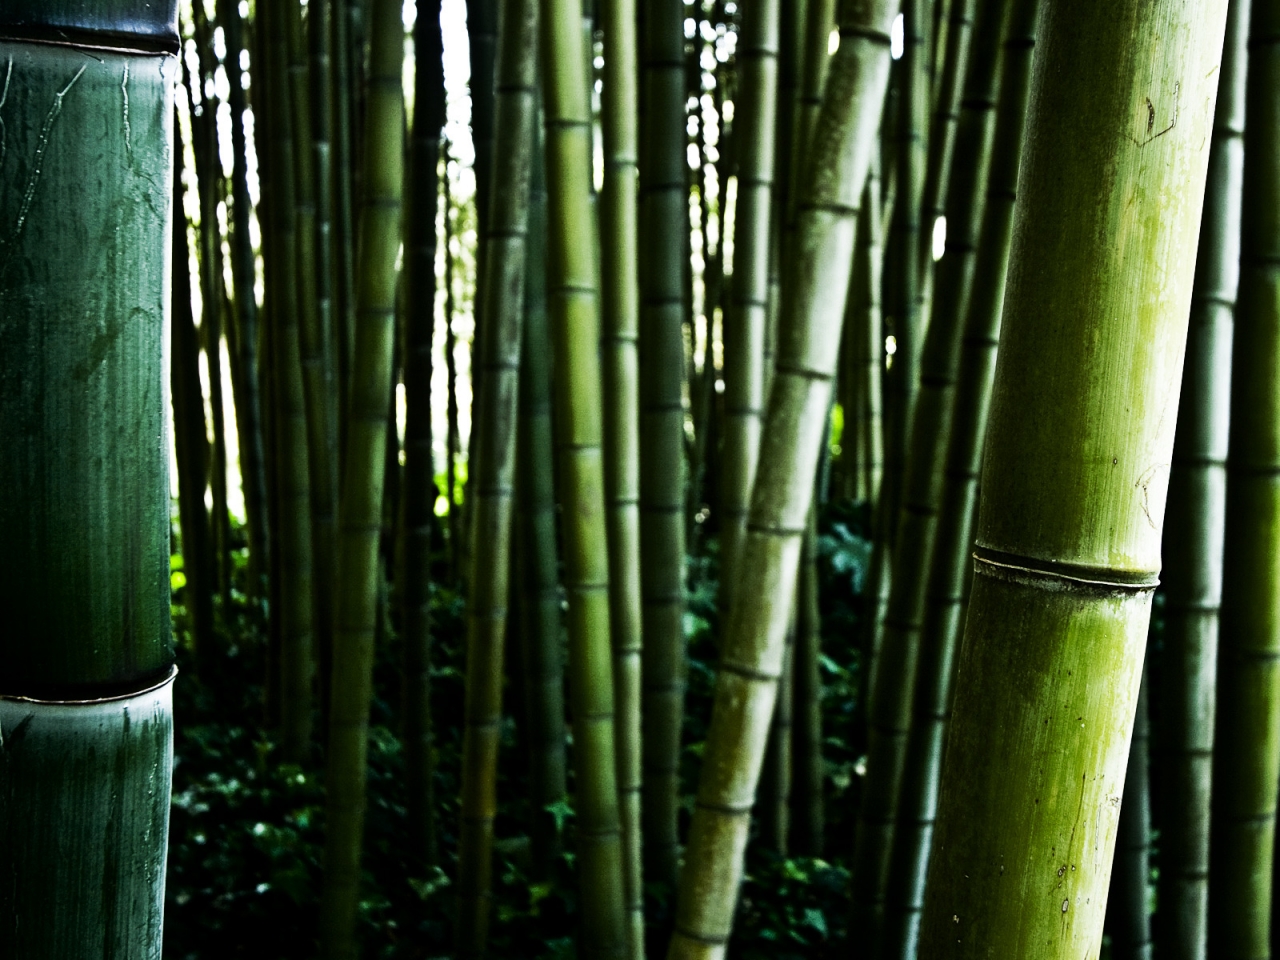 Bamboo stalks for 1280 x 960 resolution